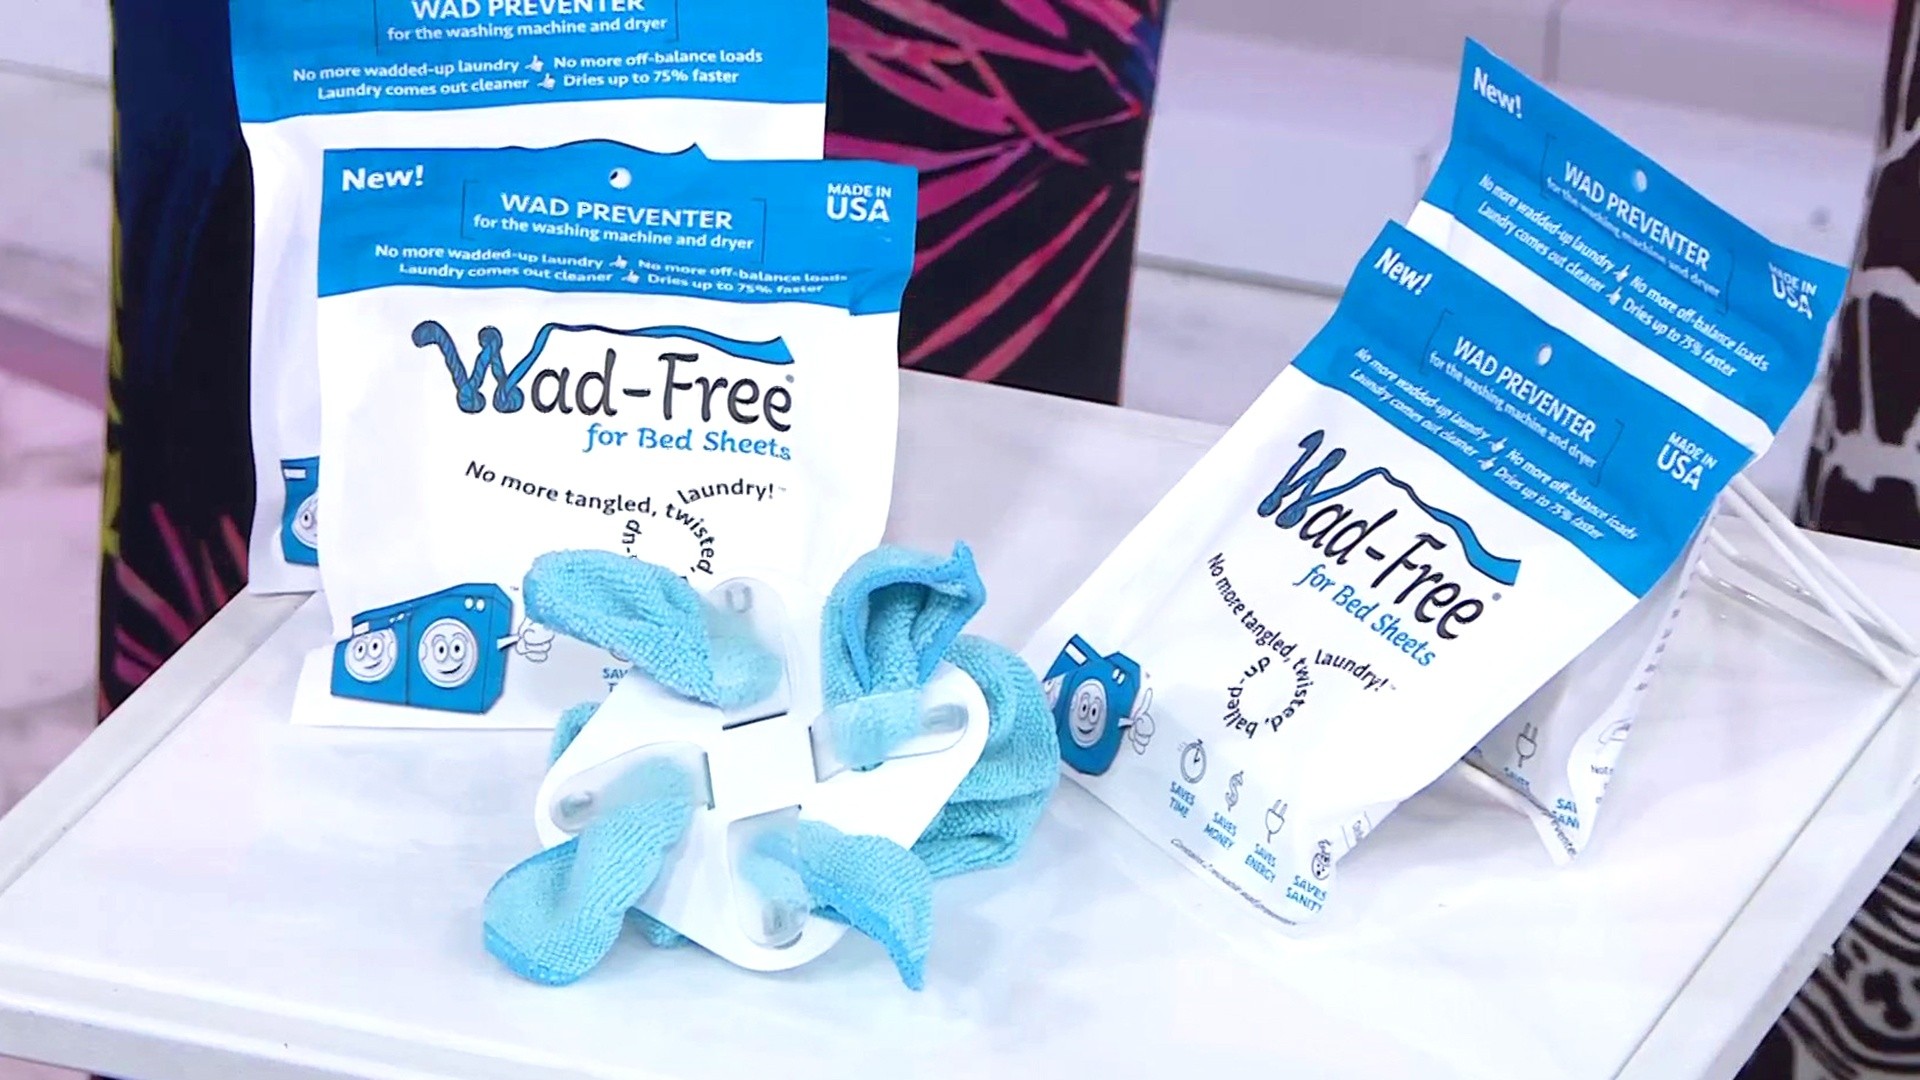 Wad-Free for Bed Sheets - 2 packages (for 4 sheets)